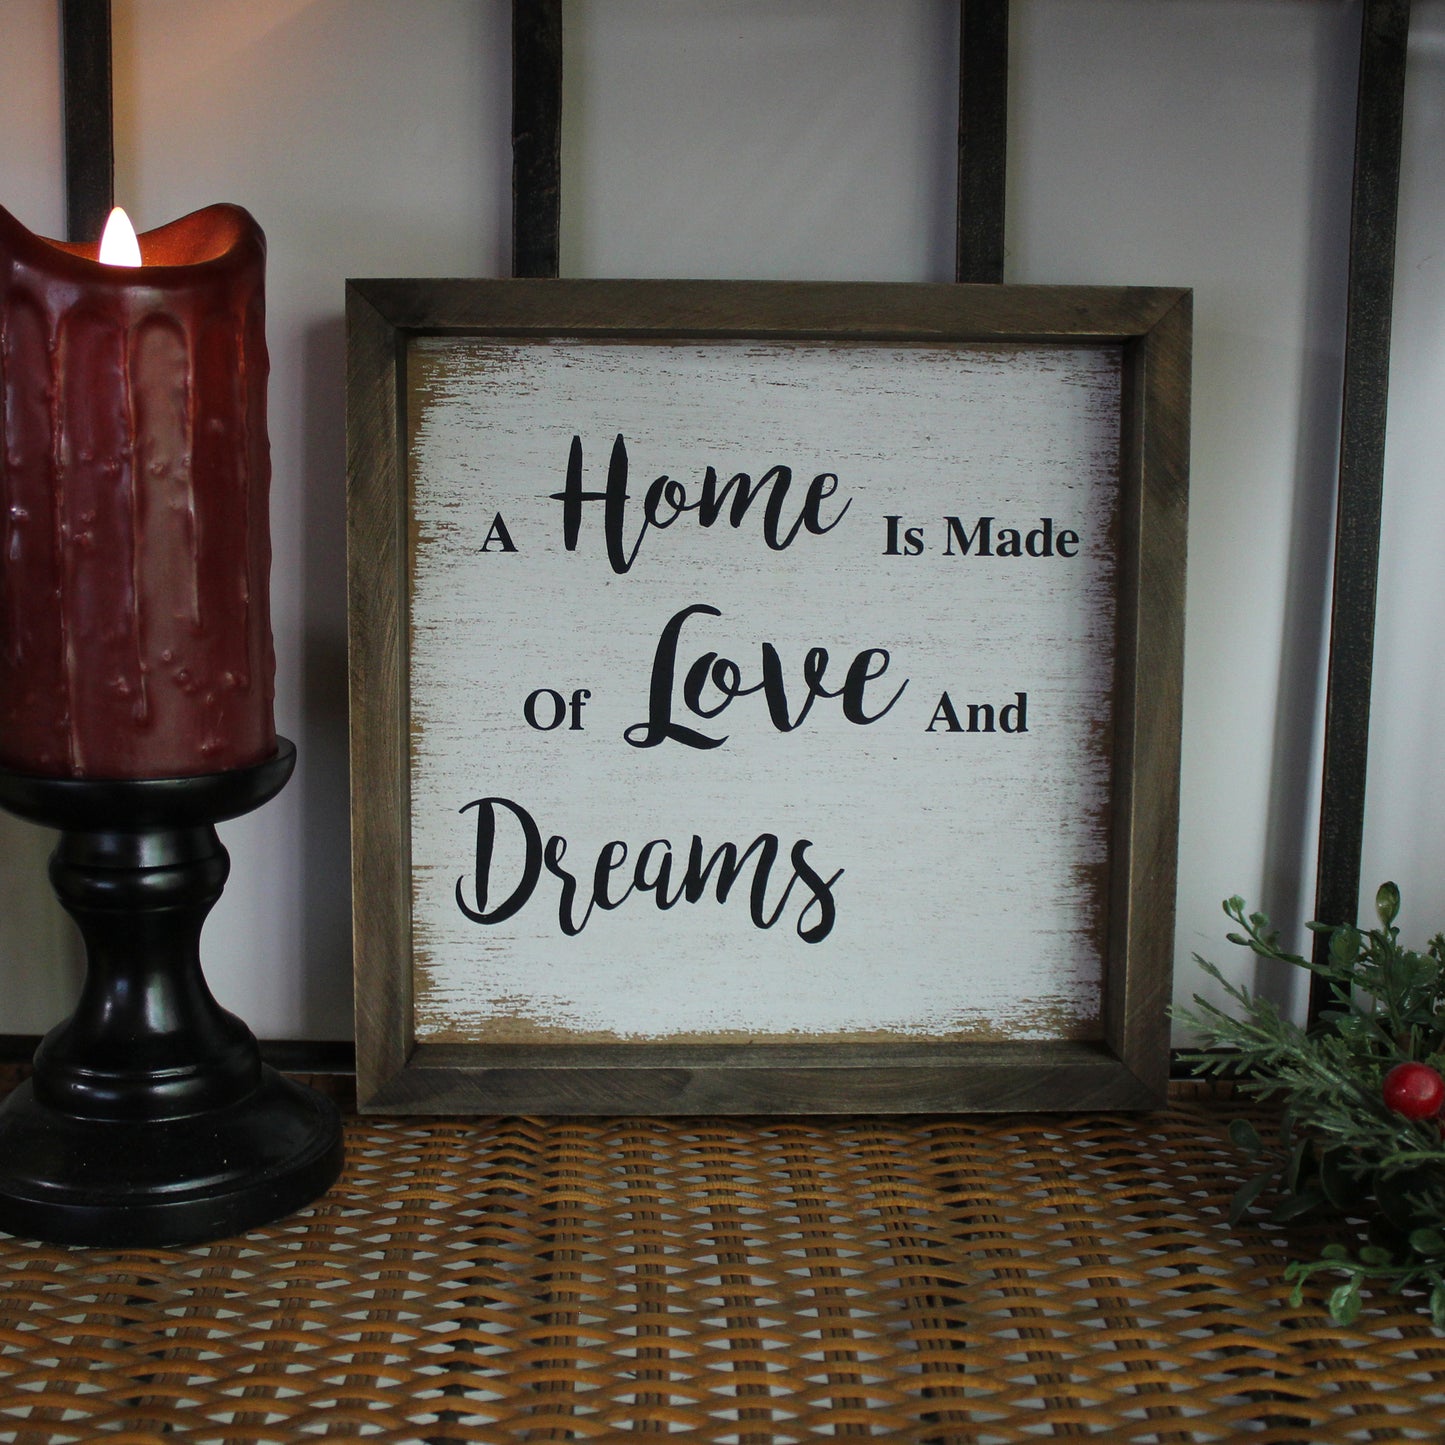 CVHOMEDECO. Vintage Distressed "A home is made of love and dreams" Shadow Box Frame Wall Mounted Hanging Decor Art, 9.75 x 9.75 Inch